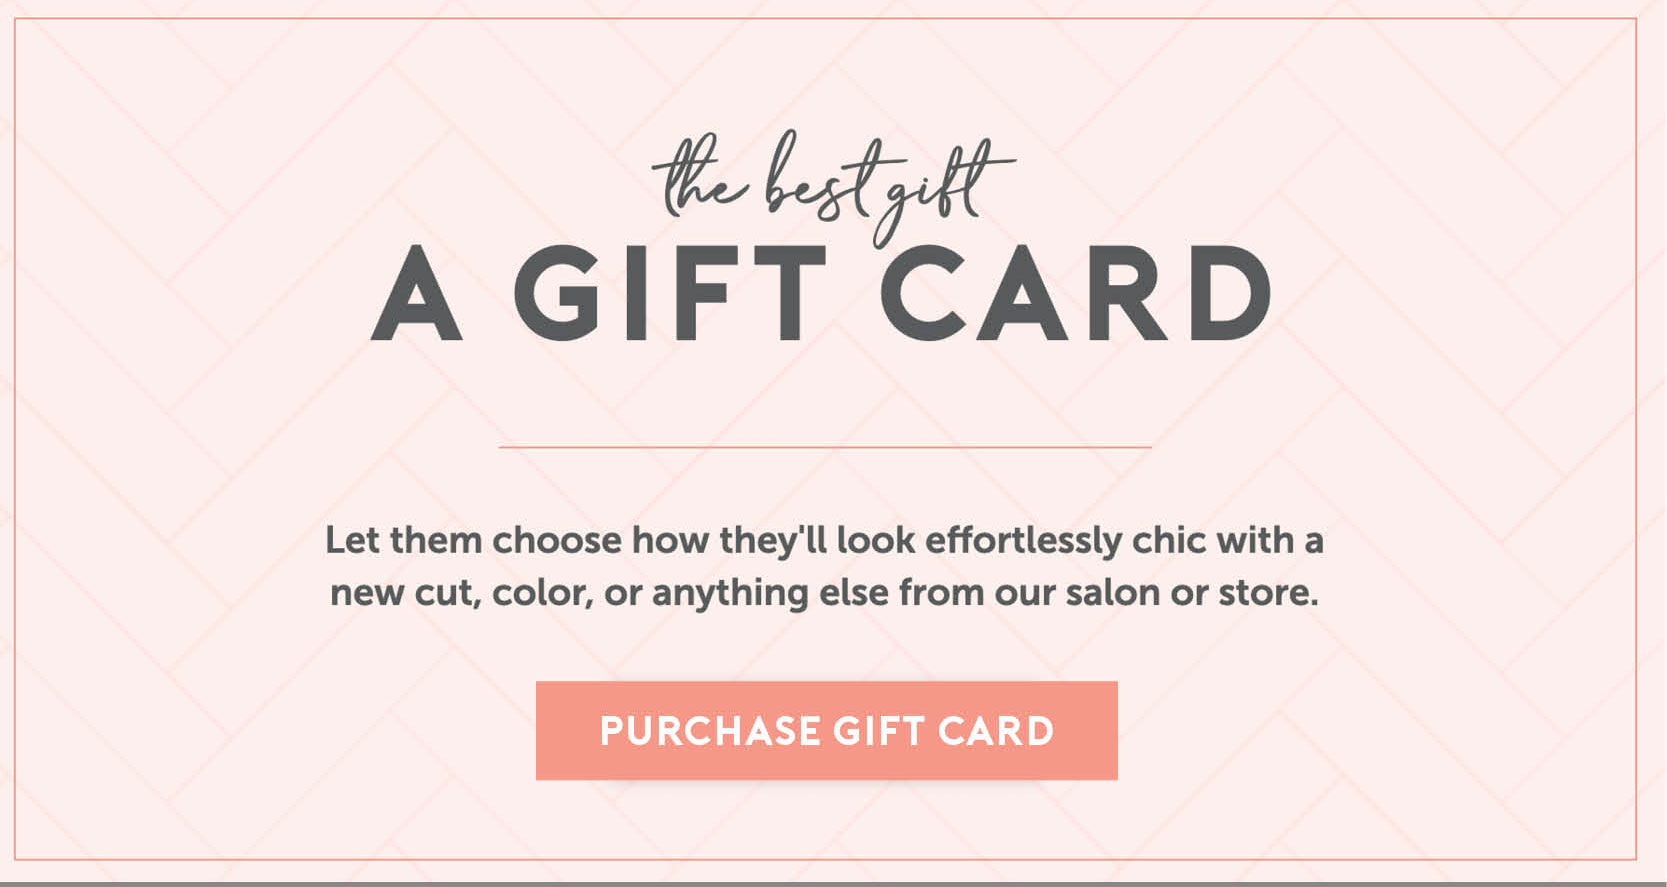 The best gift card. Let them choose how they'll look effortlessly chic with a new cut, color, or anything else from our salon or store. Click here to purchase gift cards. 